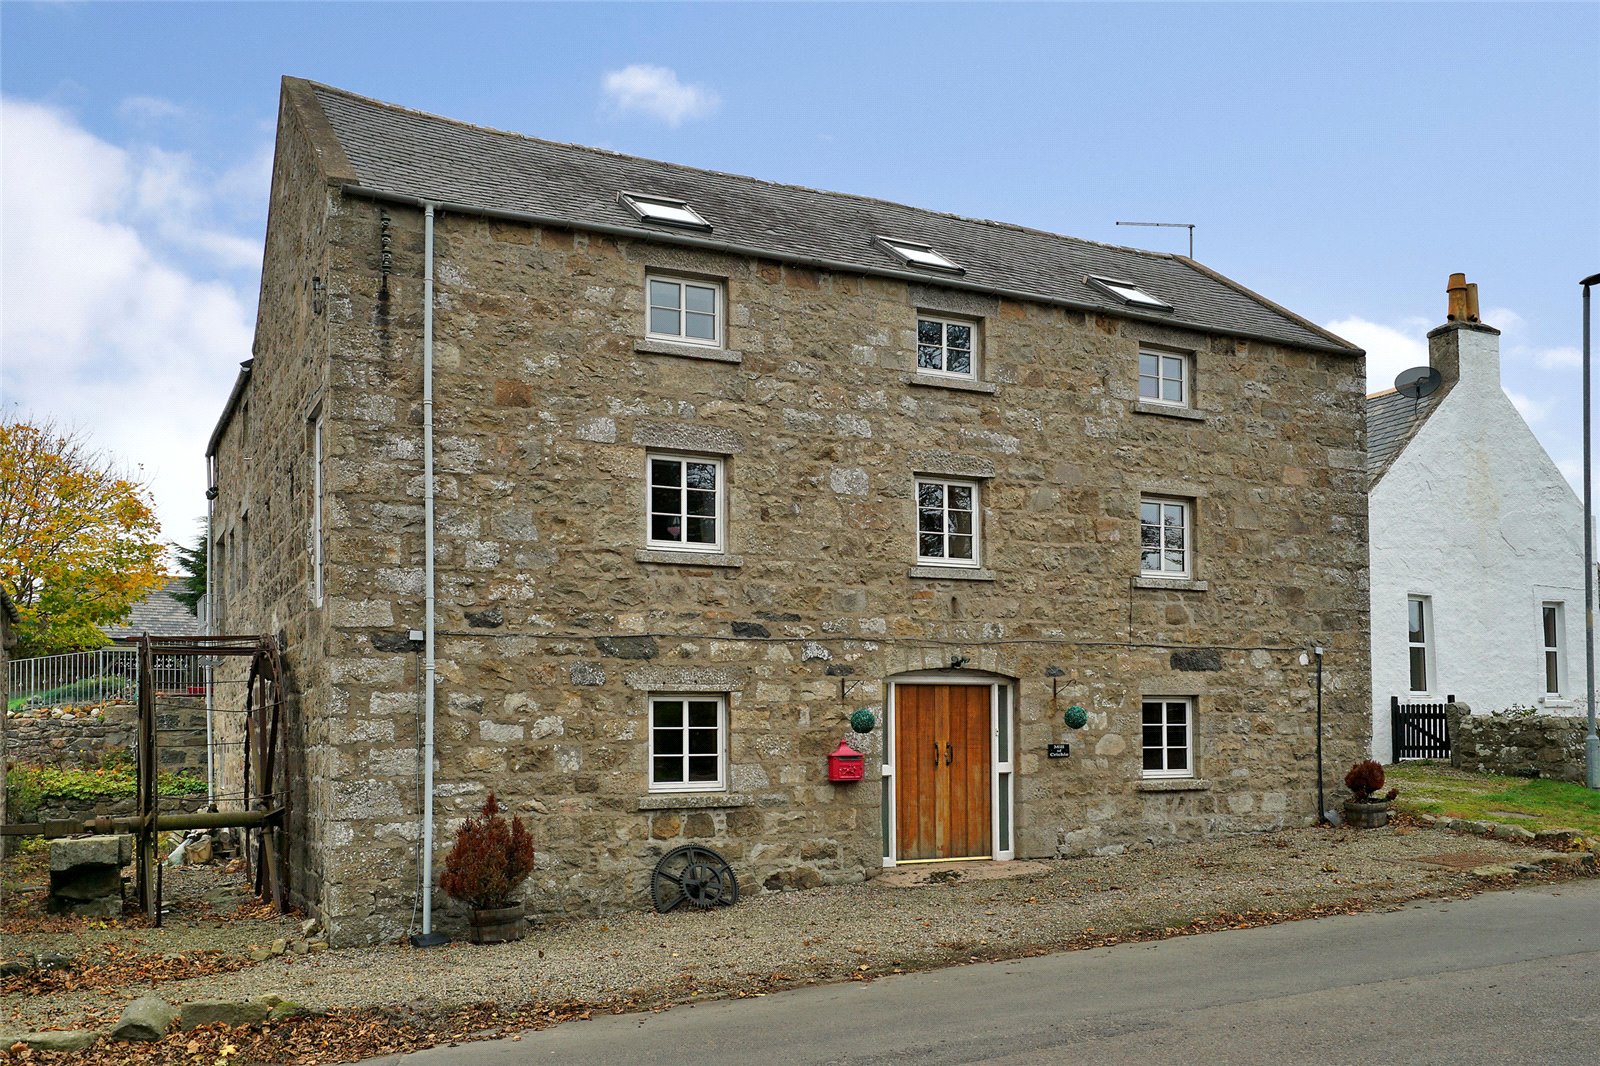 This converted mill offers accommodation like no other